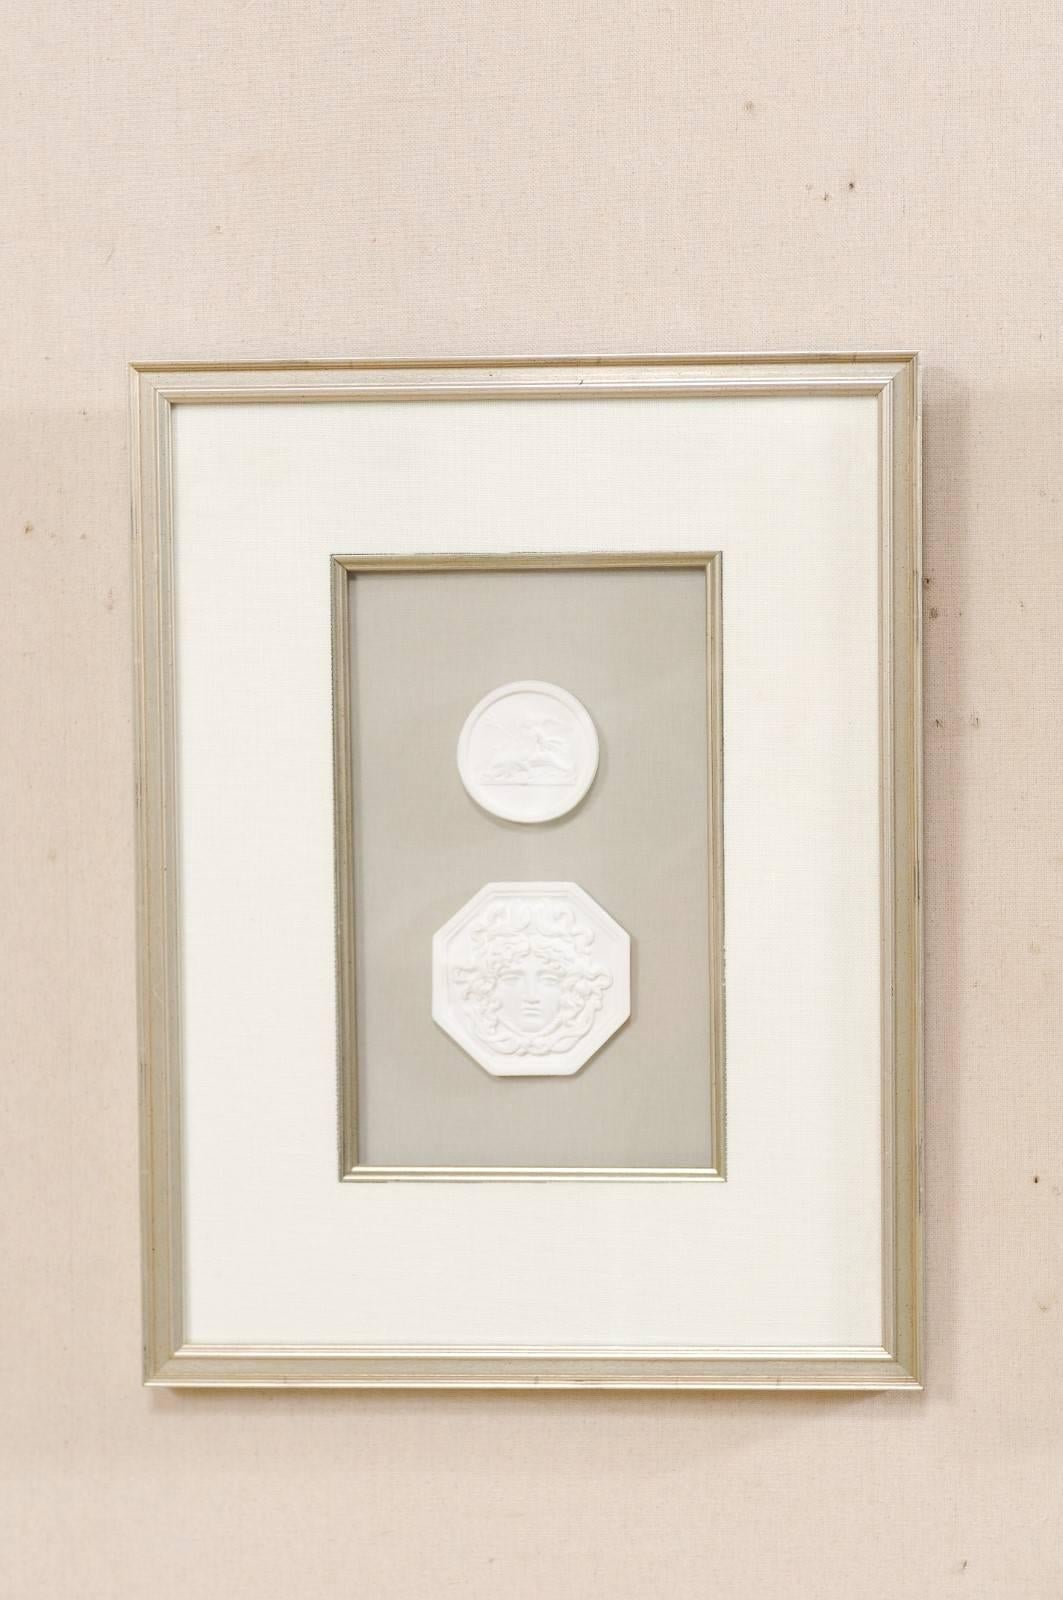 A collection of four framed assortment of white Italian intaglios. This is a set of hand-cast intaglios (from the original antique Italian Intaglios) which have been mounted and set within custom silver leafed frames. The details of these